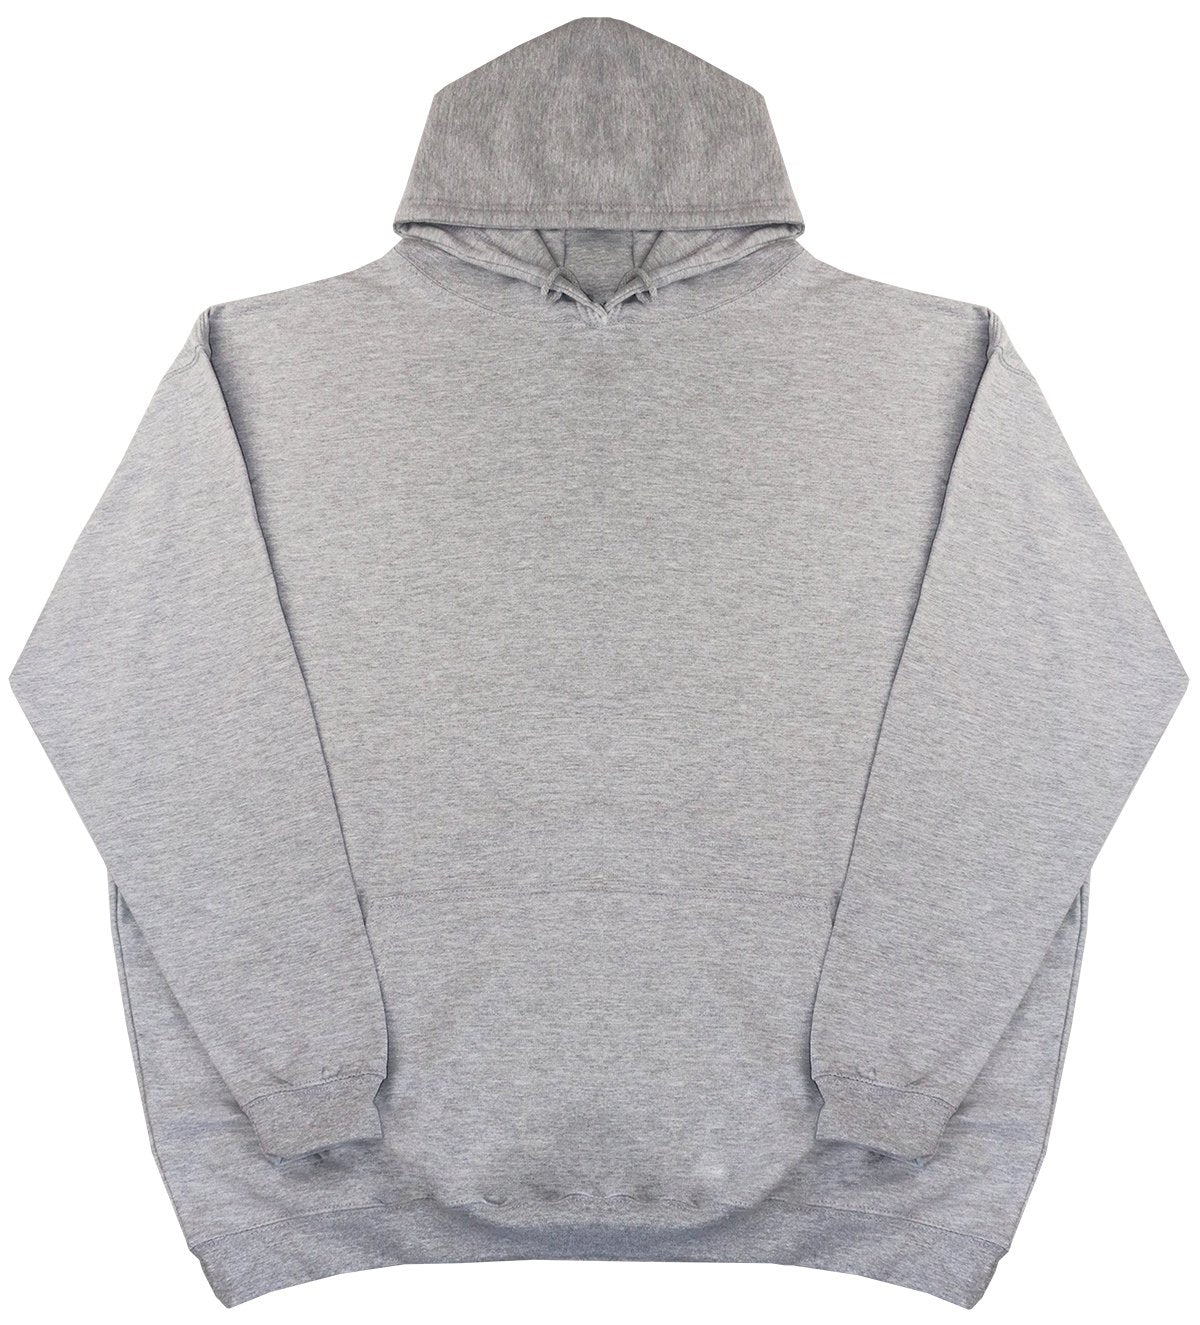 Personalised New Style Hoods - Black Text - Oversized Comfy Hoody